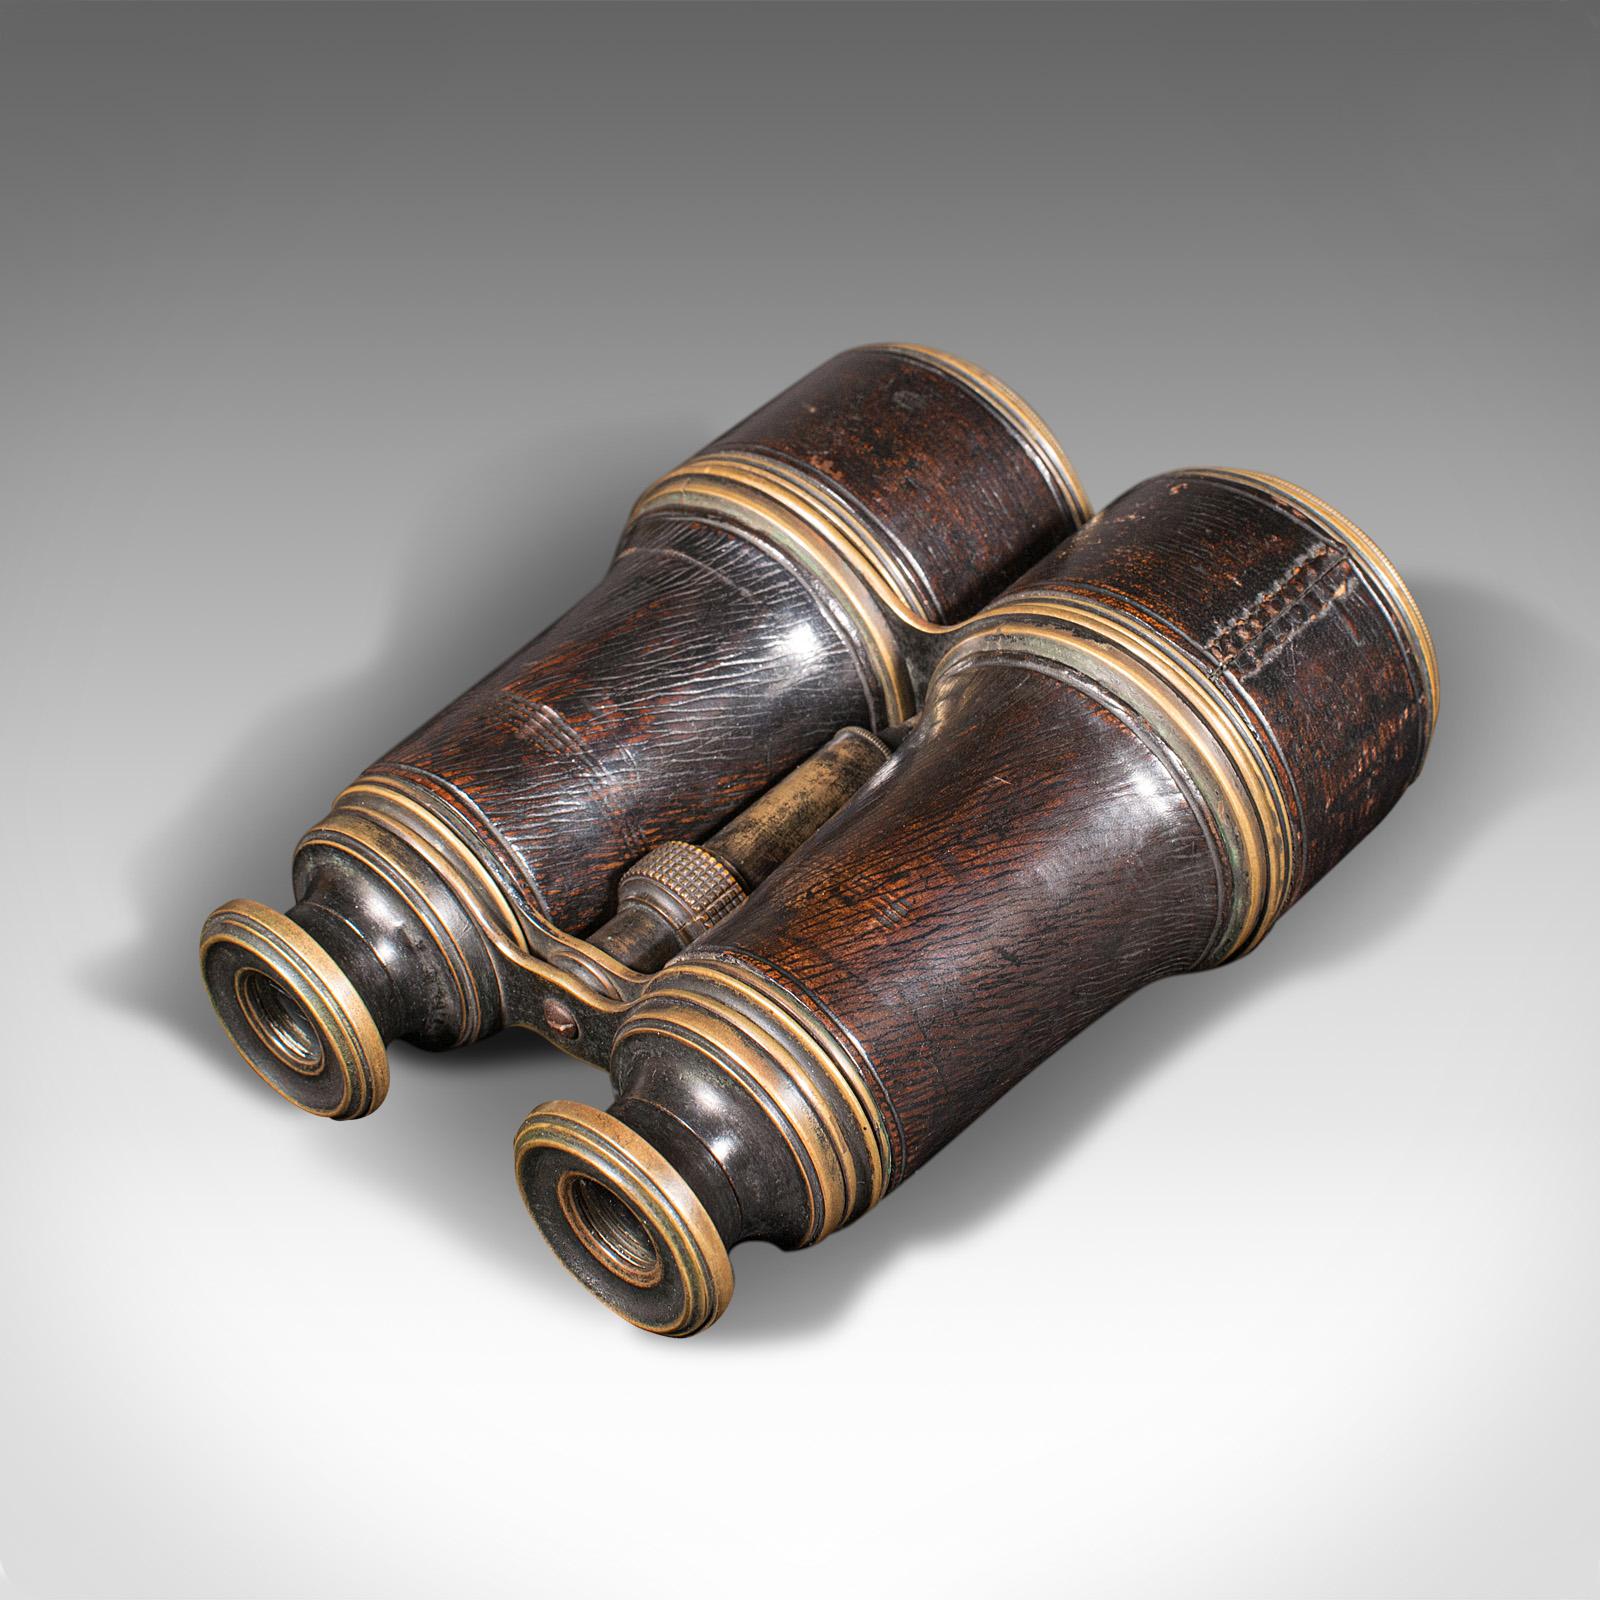 This is a pair of antique binoculars. An English, brass and leather optical instrument, dating to the early 20th century, circa 1920.

Wonderfully patinated pair of early 20th century binoculars
Displaying a desirable aged patina